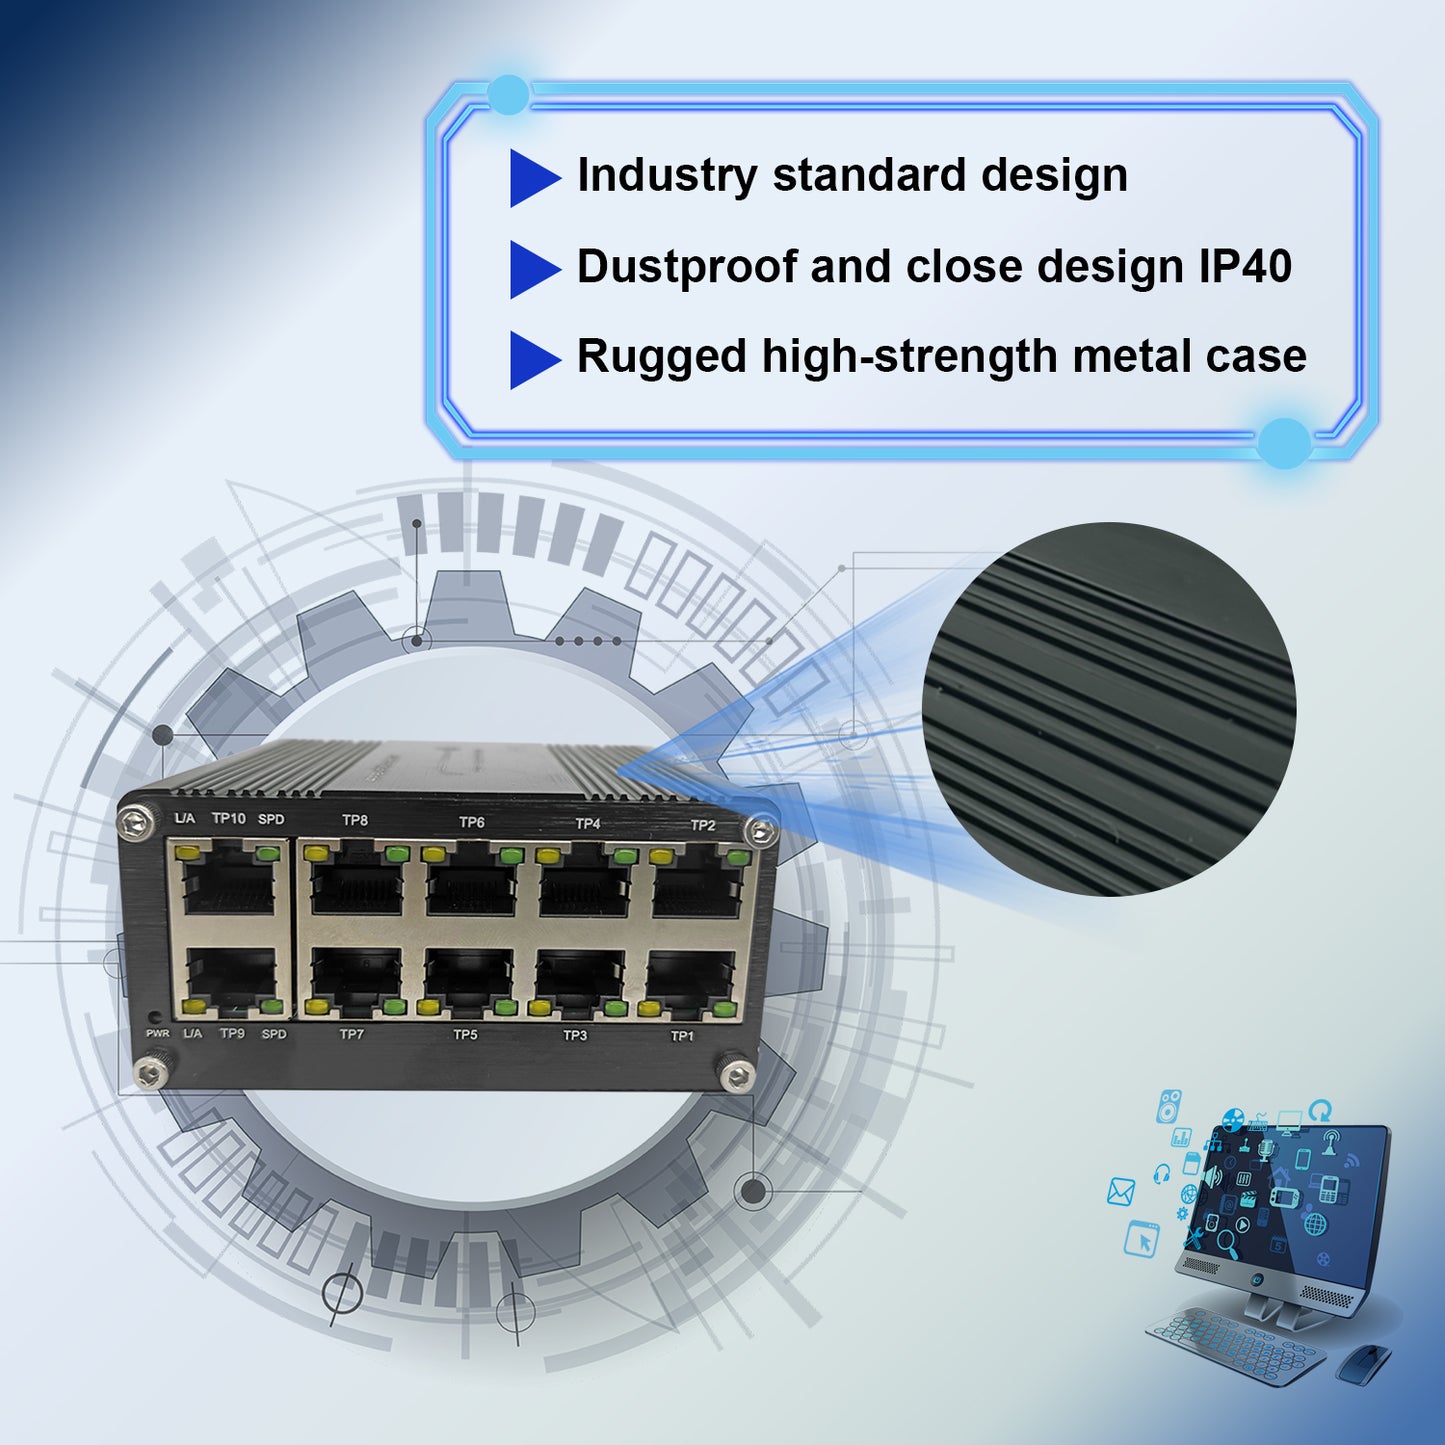 10 Ports Industrial Gigabit Ethernet Switch 10/100/1000BASE-T RJ45 Compact Industrial Switch with auto-MDI/MDI-X Function 12~48VDC Wide Range Power Input